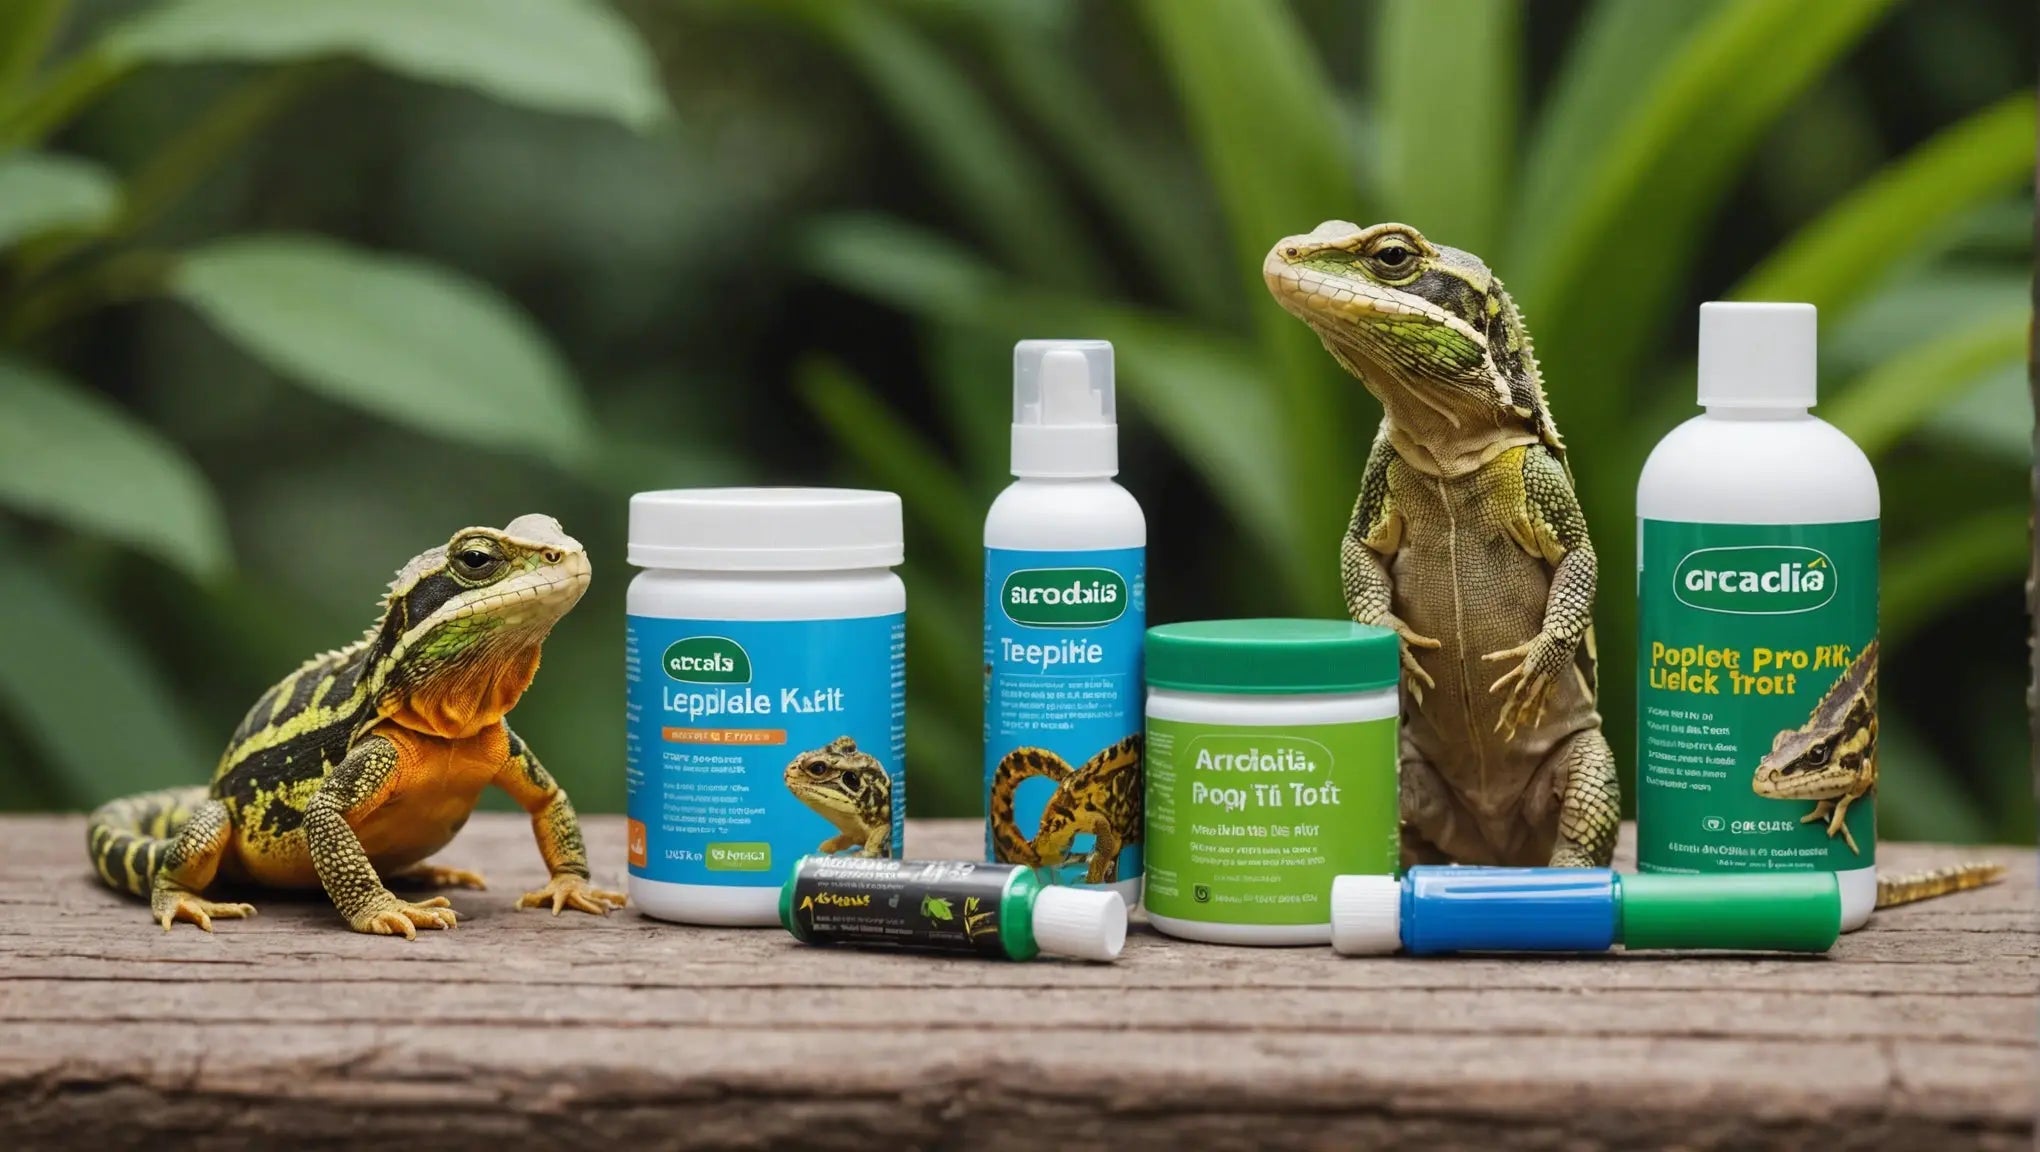 Enhance Your Reptile's Health with Arcadia Reptile Prot5 UVB Kit